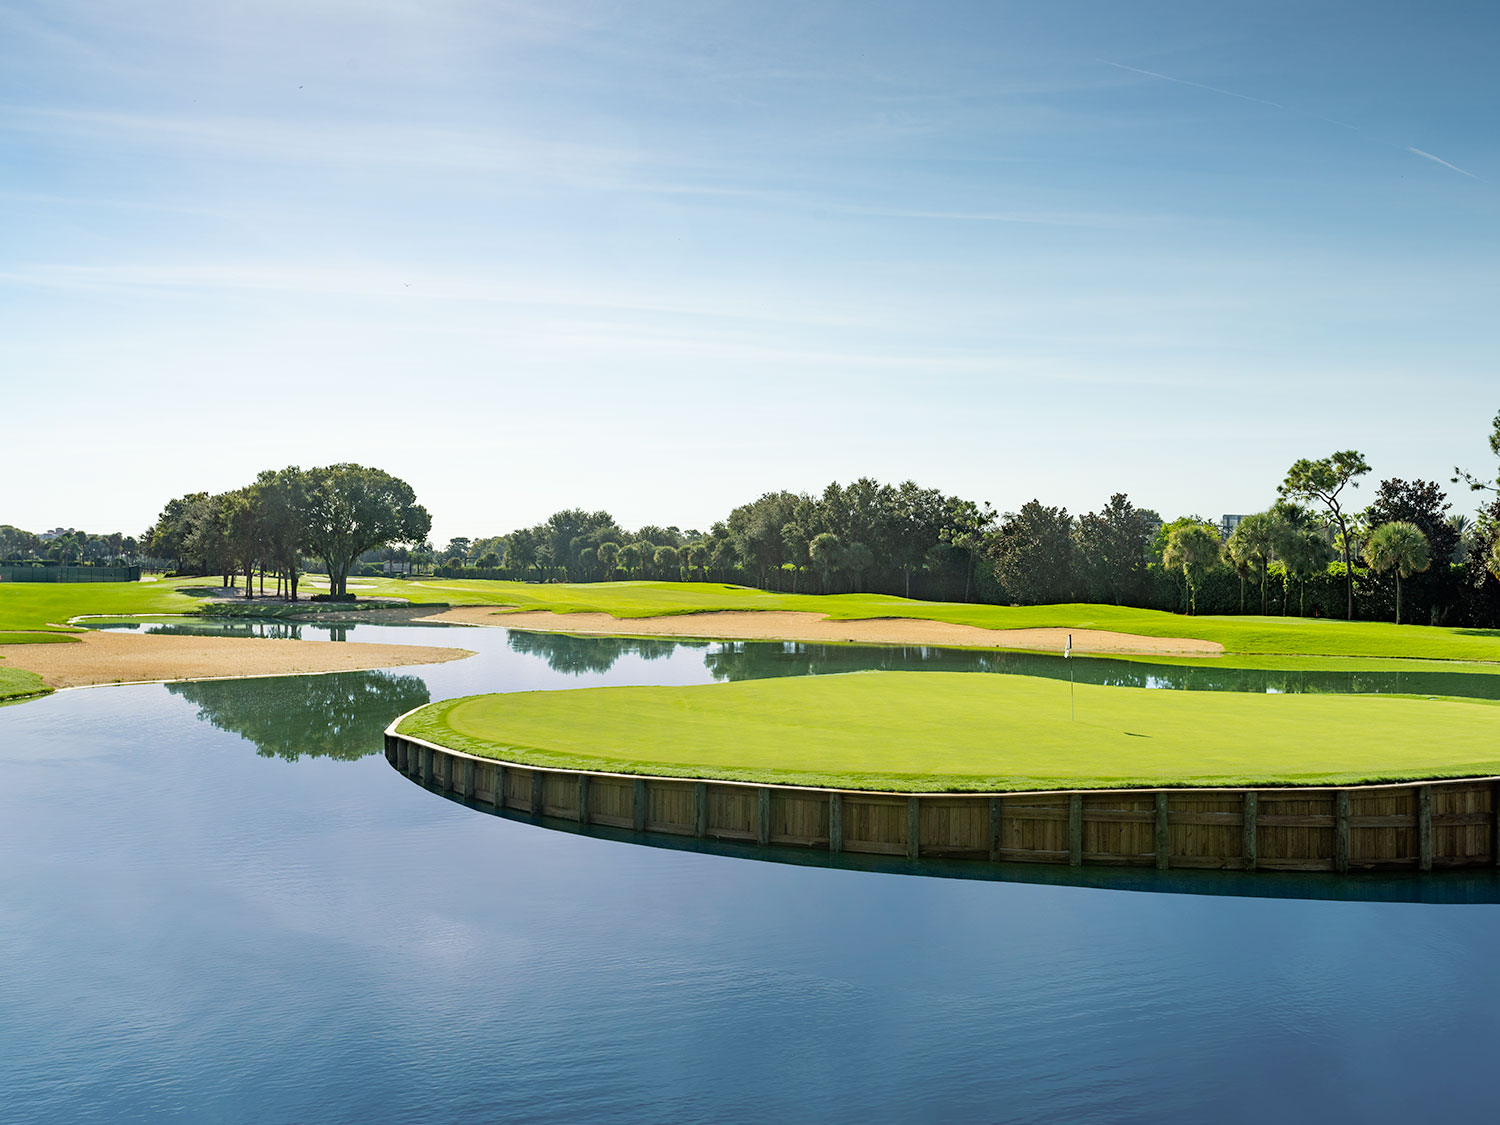 A lush, green golf course with a surrounding lake in Florida.